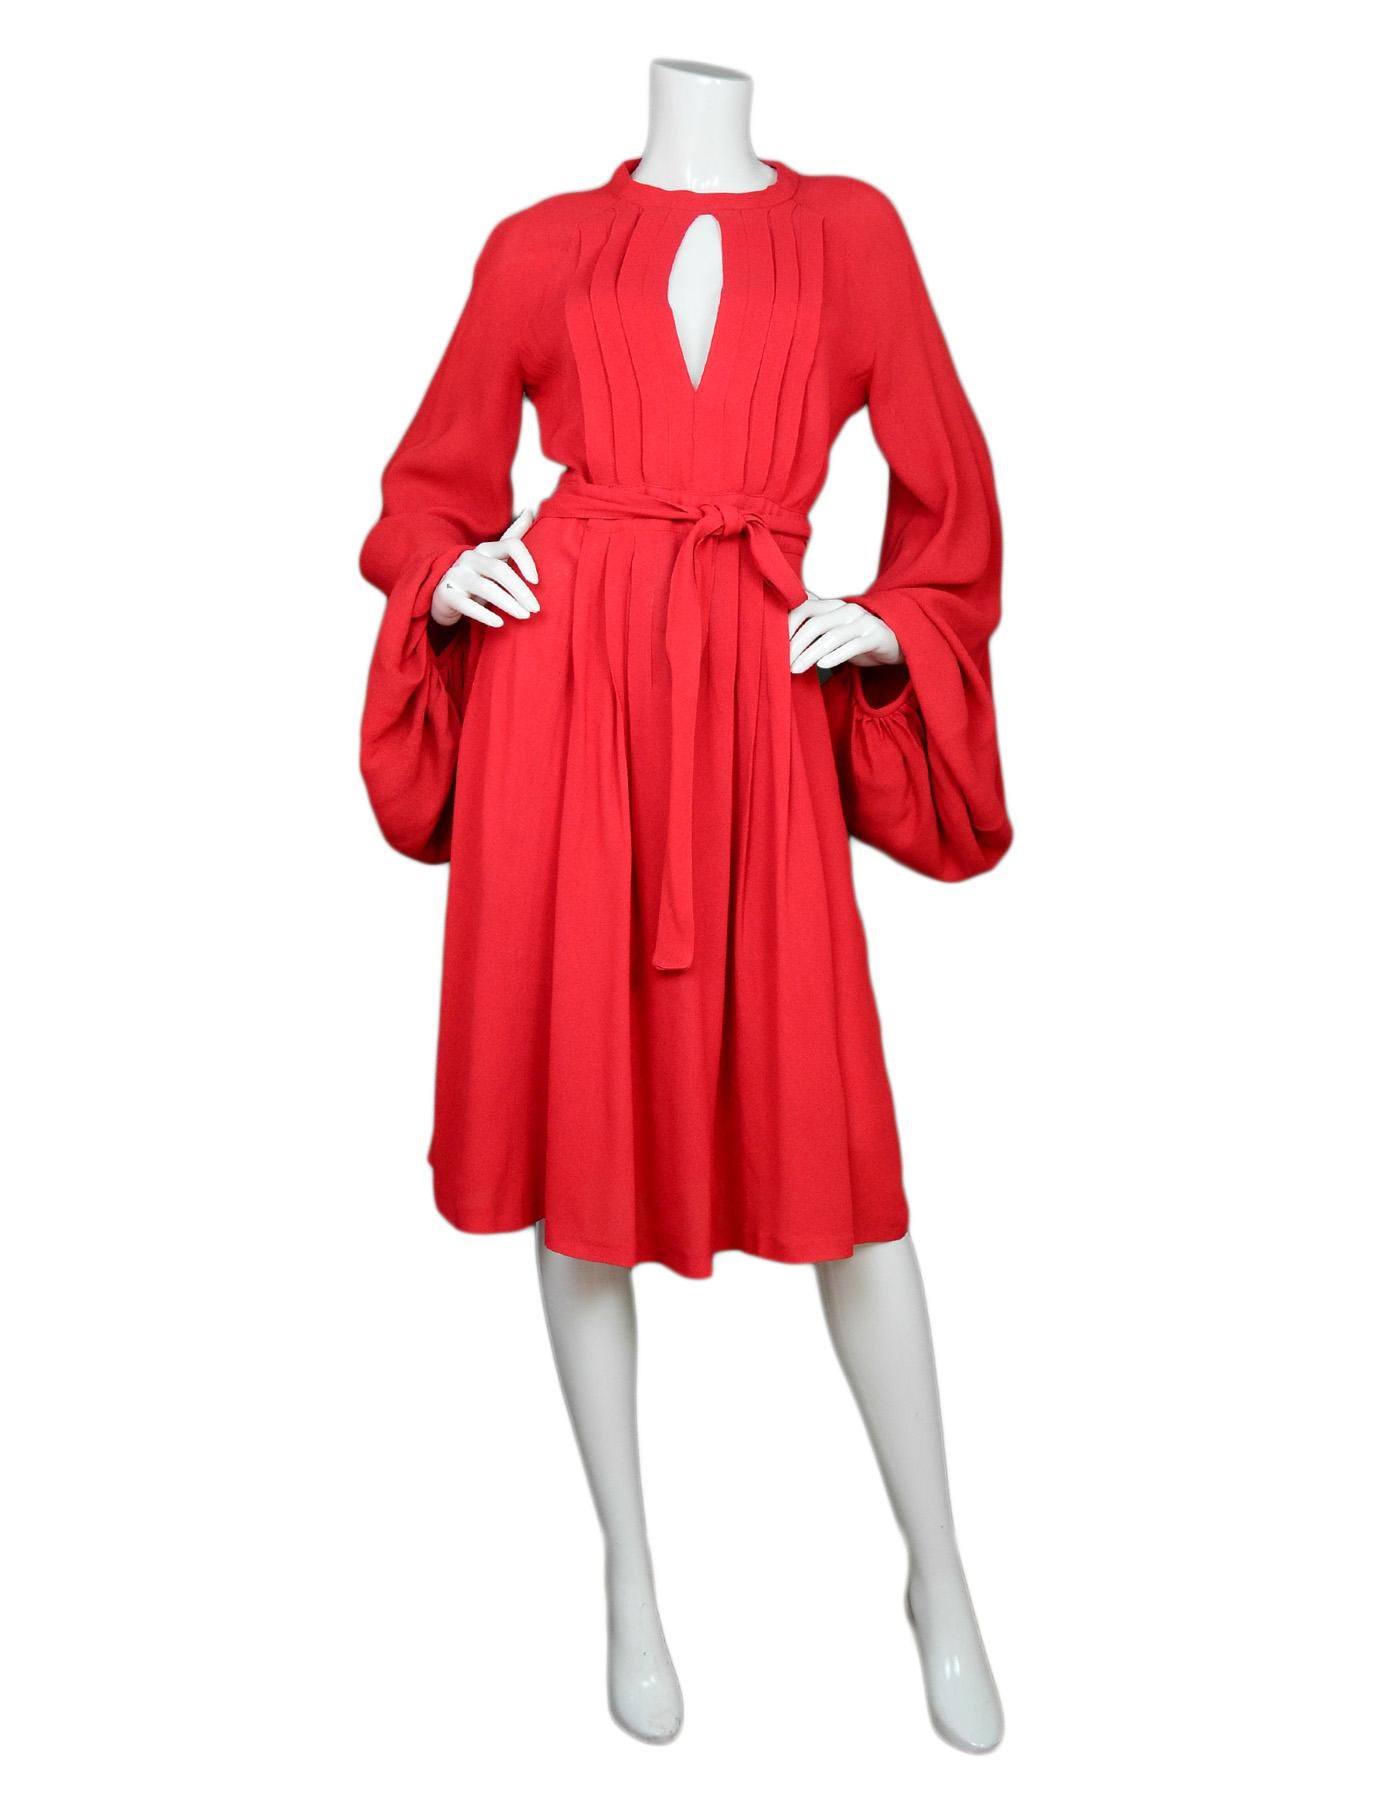 Ossie Clark Vintage '60s Red Crepe Wrap Dress Sz 14

Made In:  London
Year of Production: 1960's
Color: Red
Materials: Crepe fabric, no composition tag
Opening/Closure: Back hook-eye closure 
Overall Condition: Very good vintage, pre-owned condition